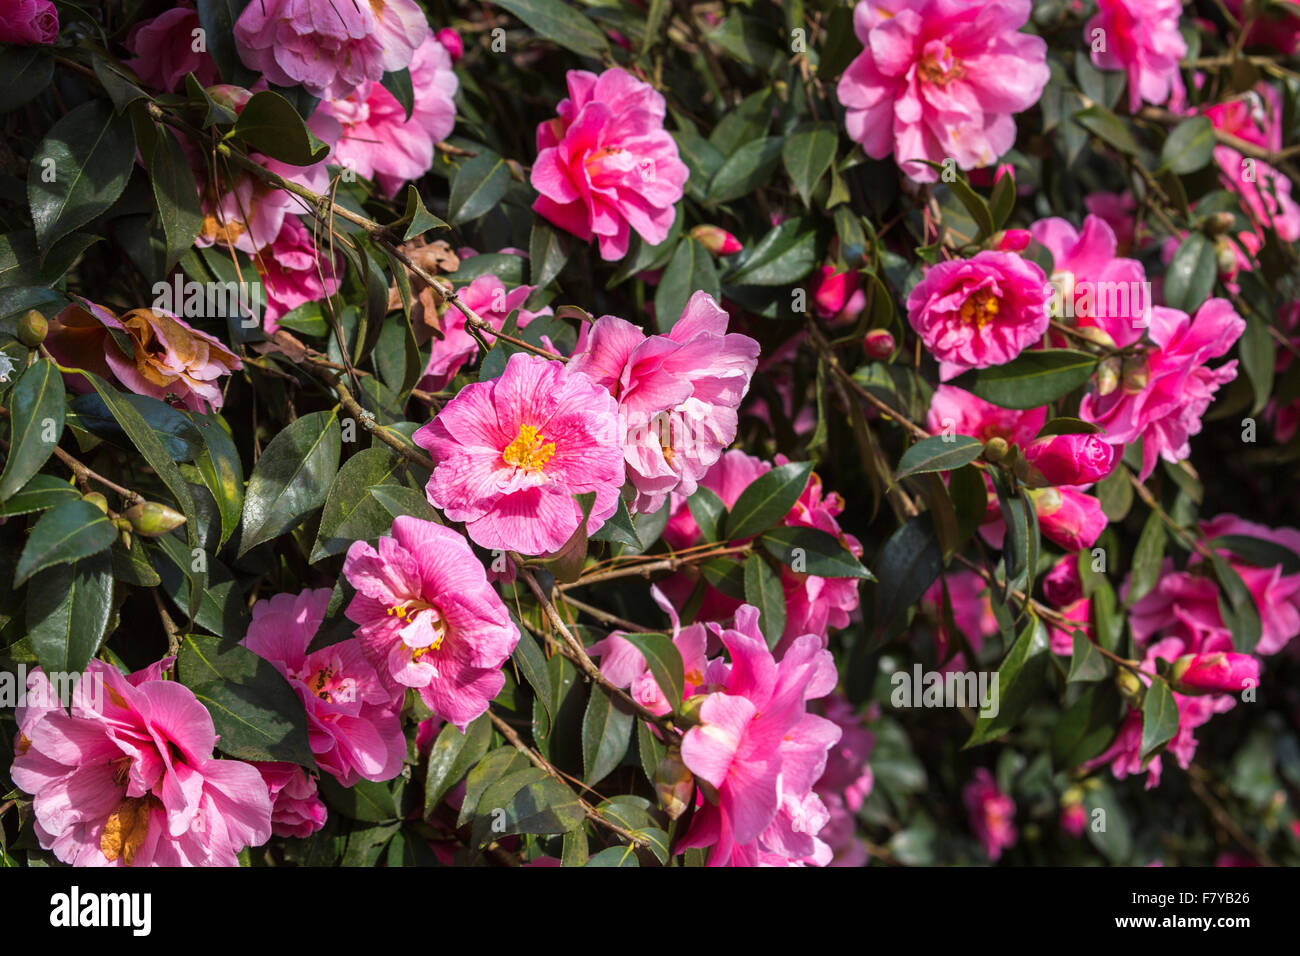 Pink camellia x williamsii 'Donation' flowering in spring at RHS Gardens Wisley Surrey, England, UK Stock Photo